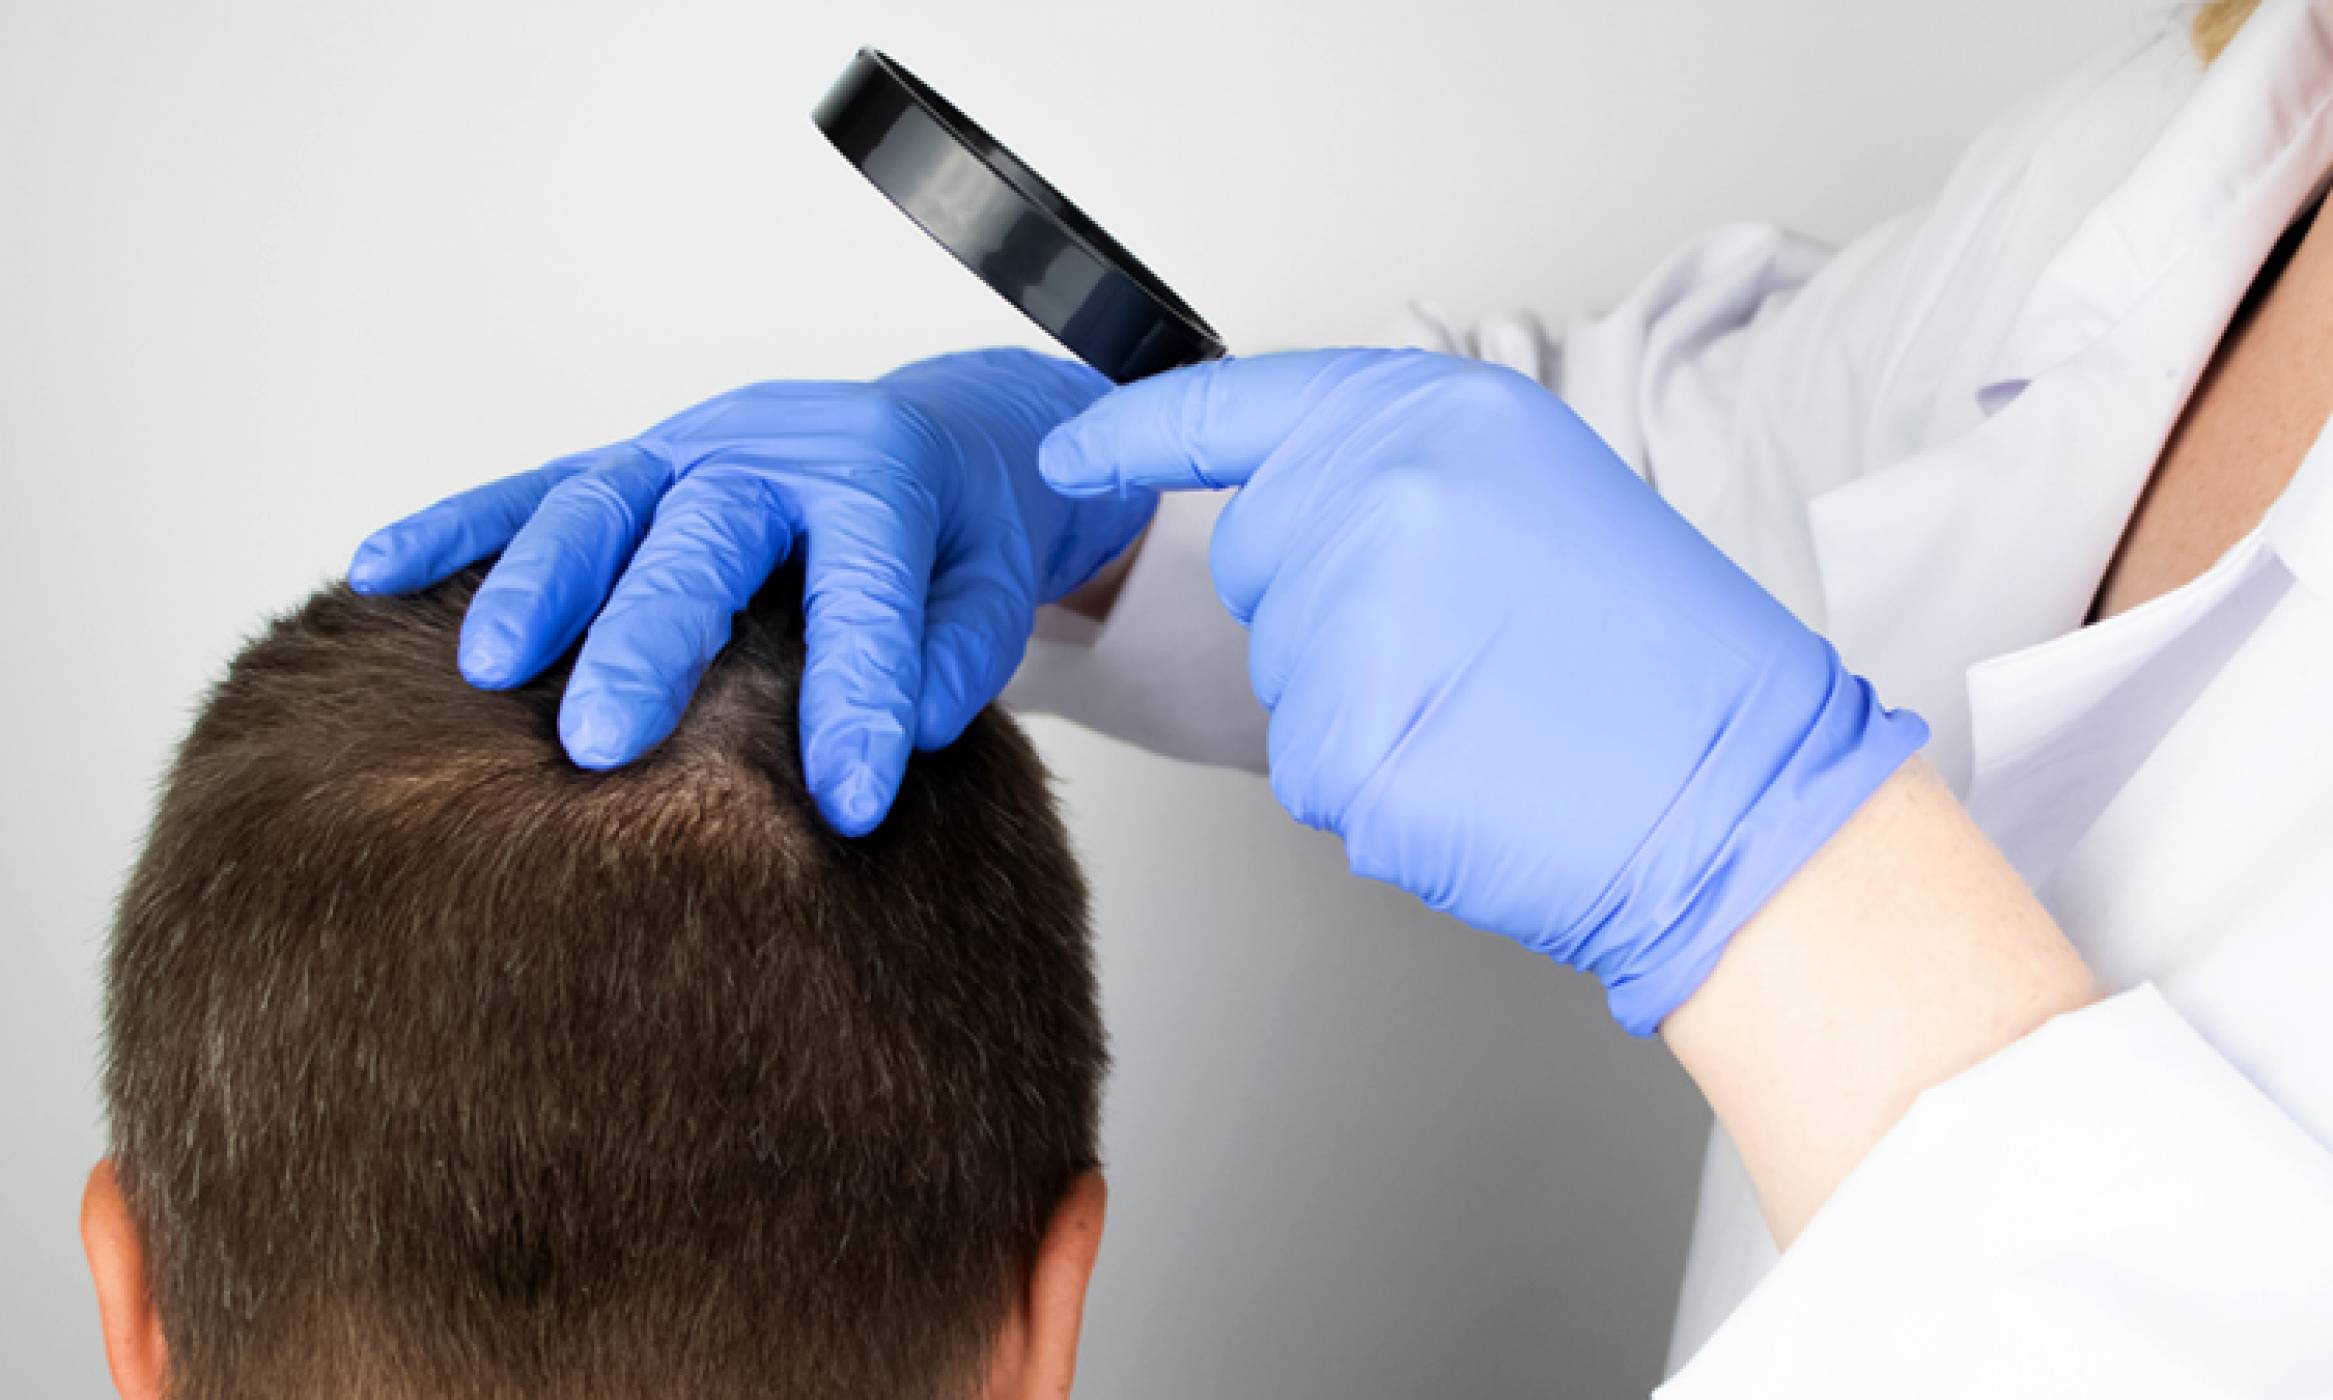 A close-up of a doctor examining the scalp of a man using a magnifier to treat any hair loss or balding patches he suffers from